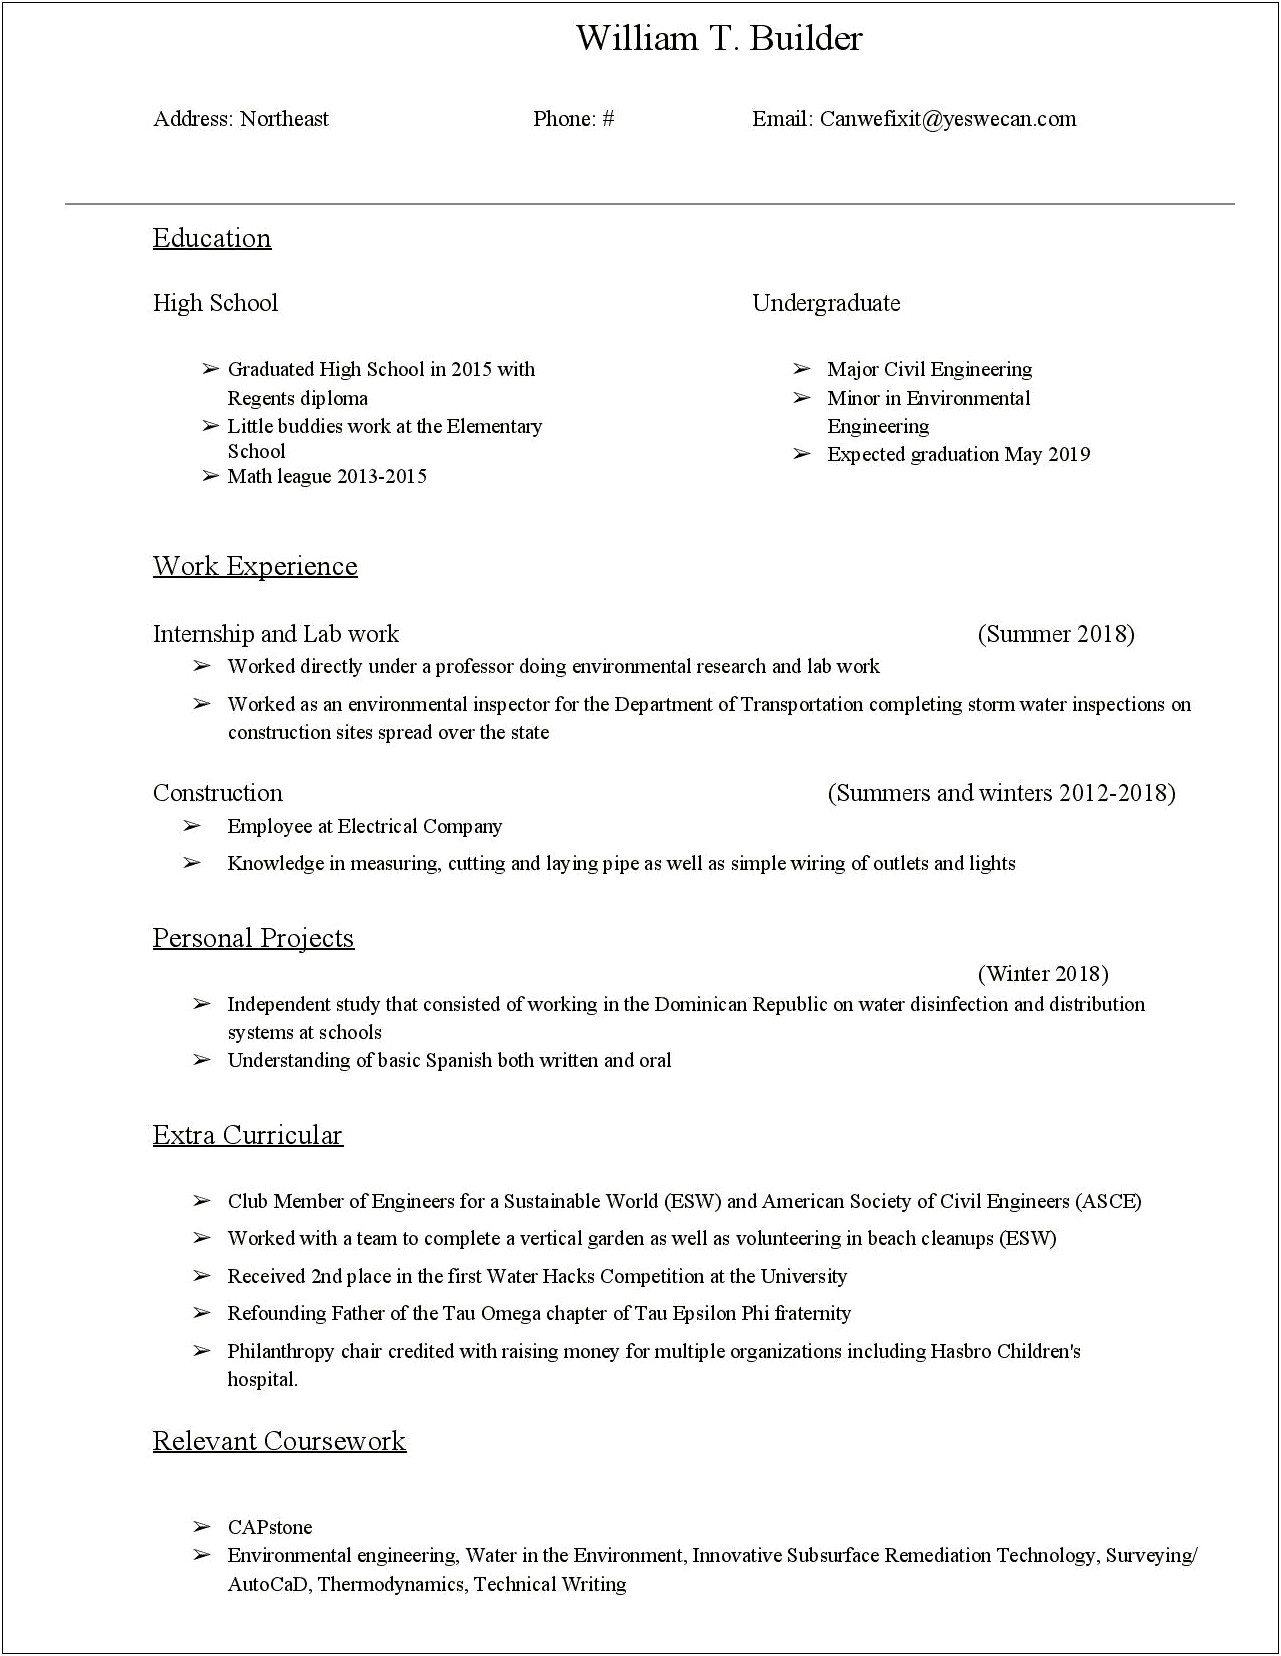 Resume For Entry Level Surveying Jobs